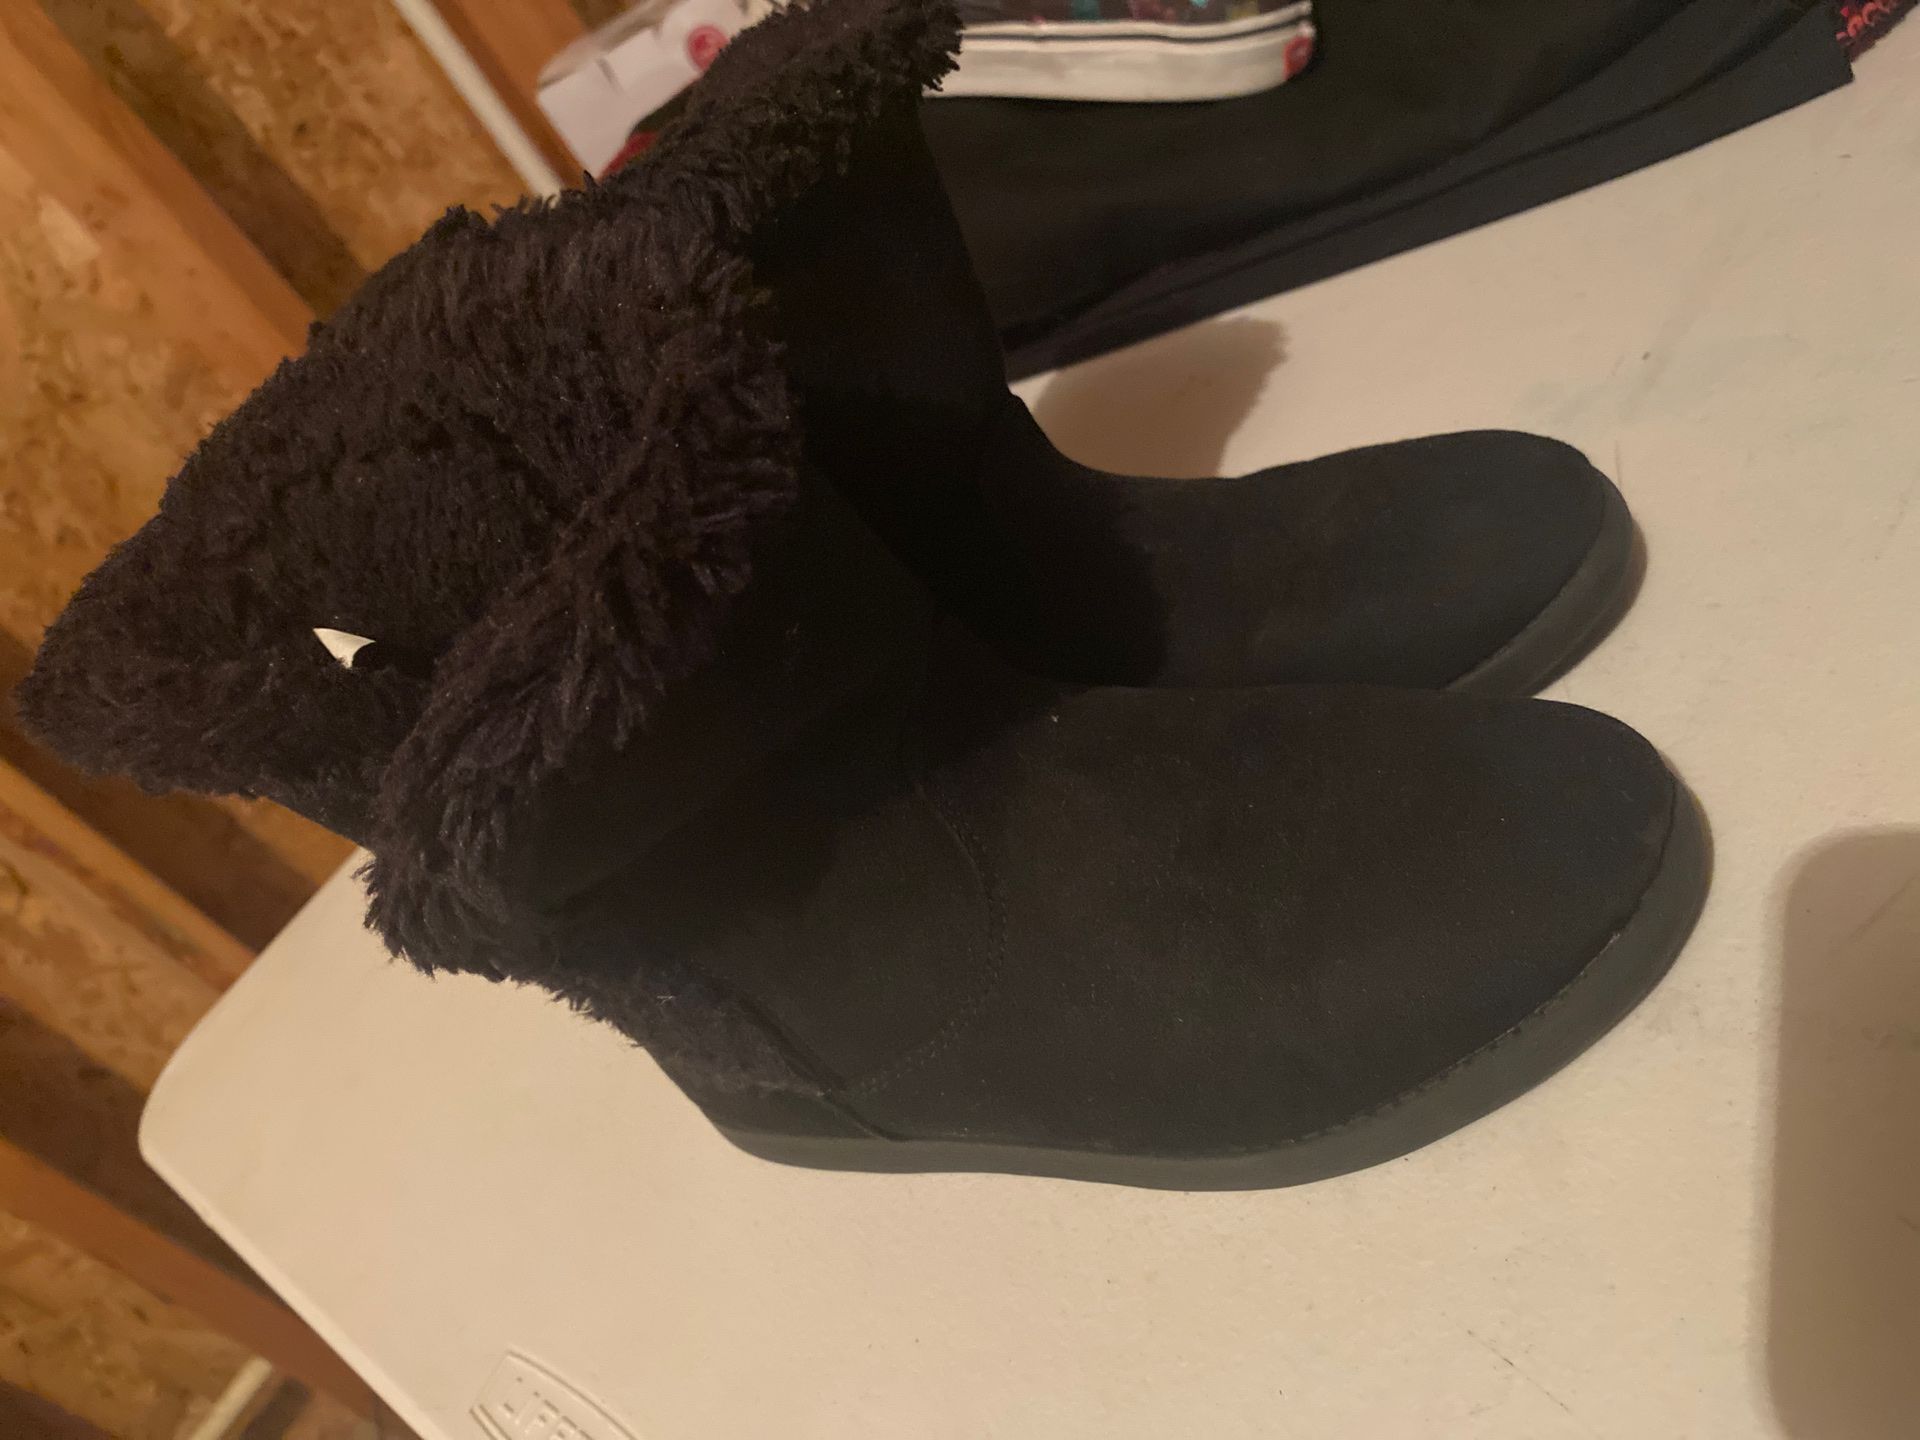 Girls boots size 2